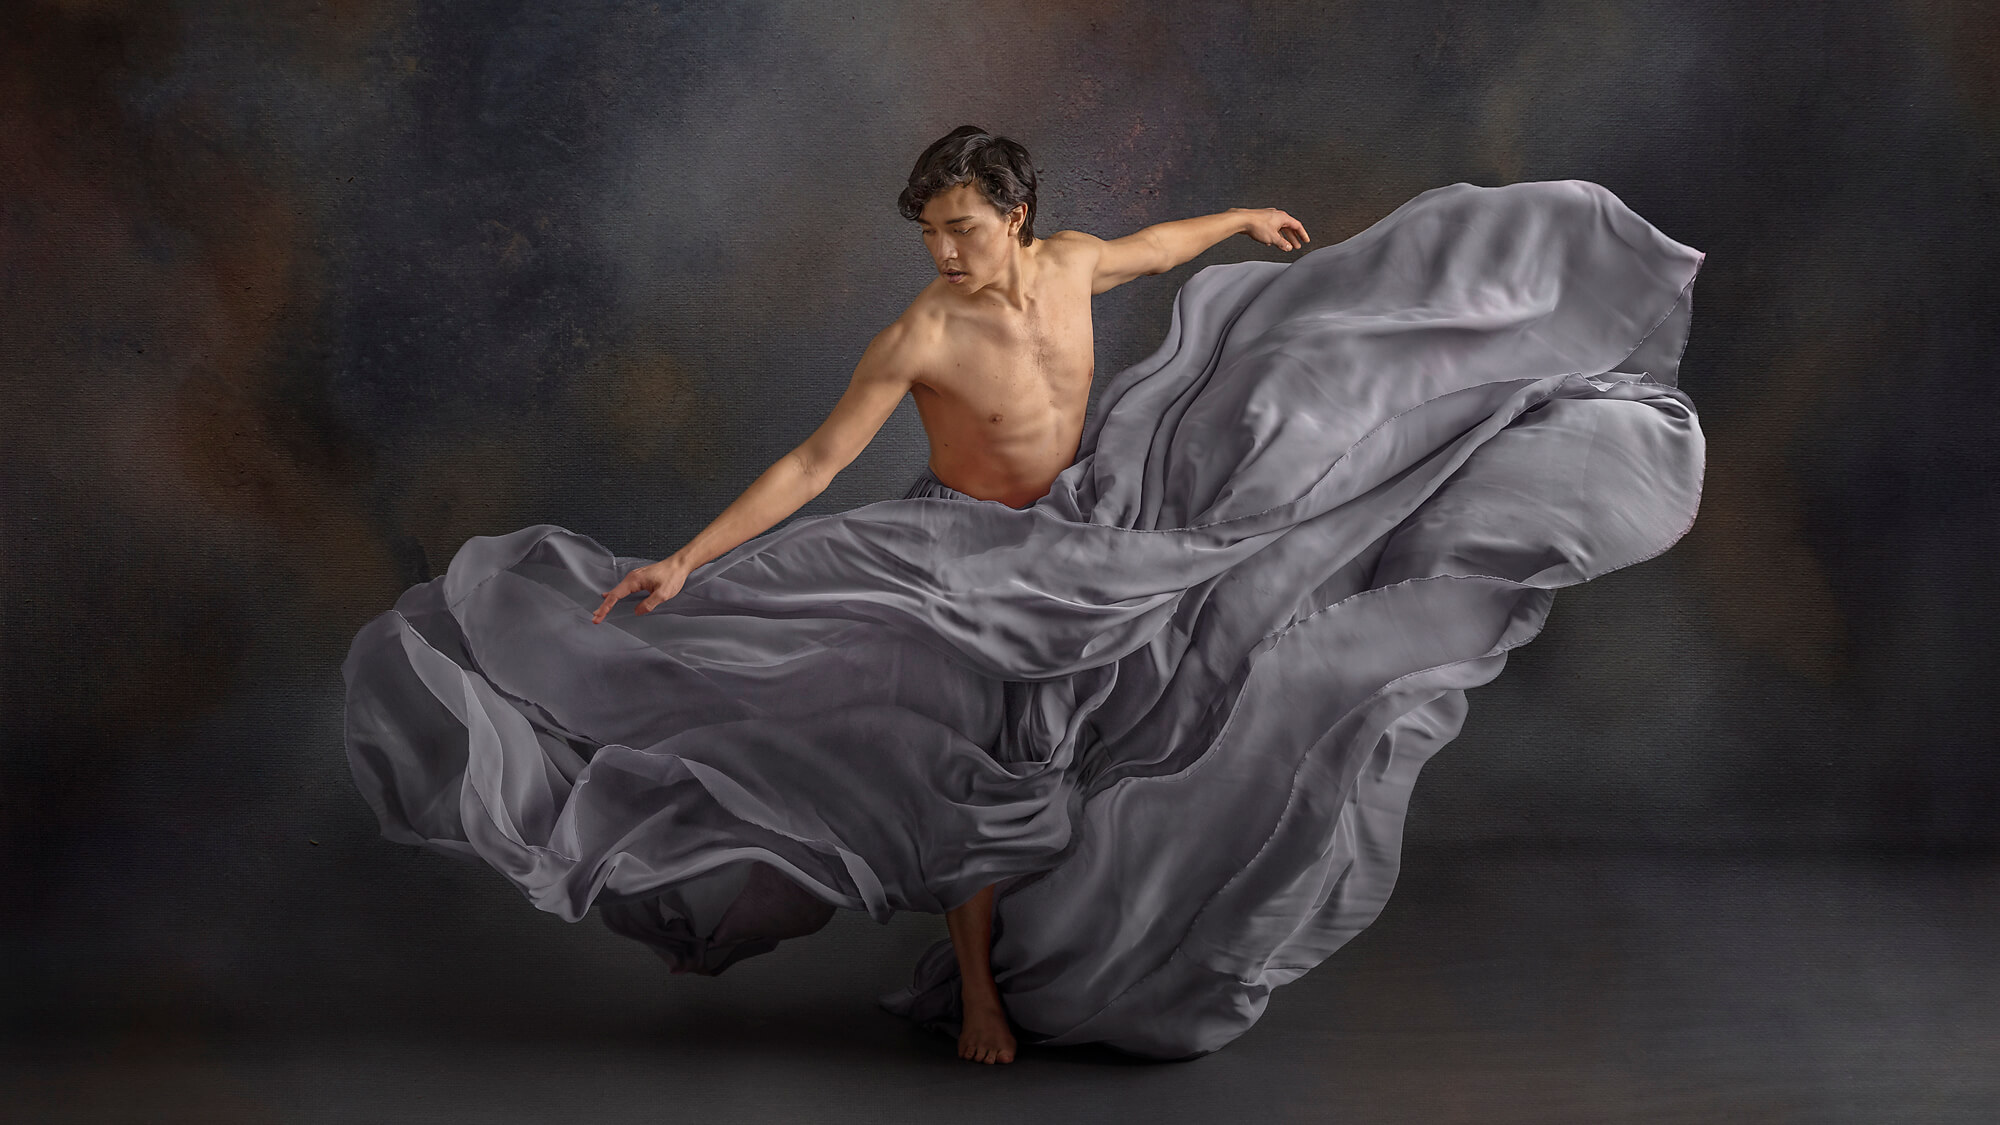 male dancer wearing a skirt in Palos Verdes, CA photography studio